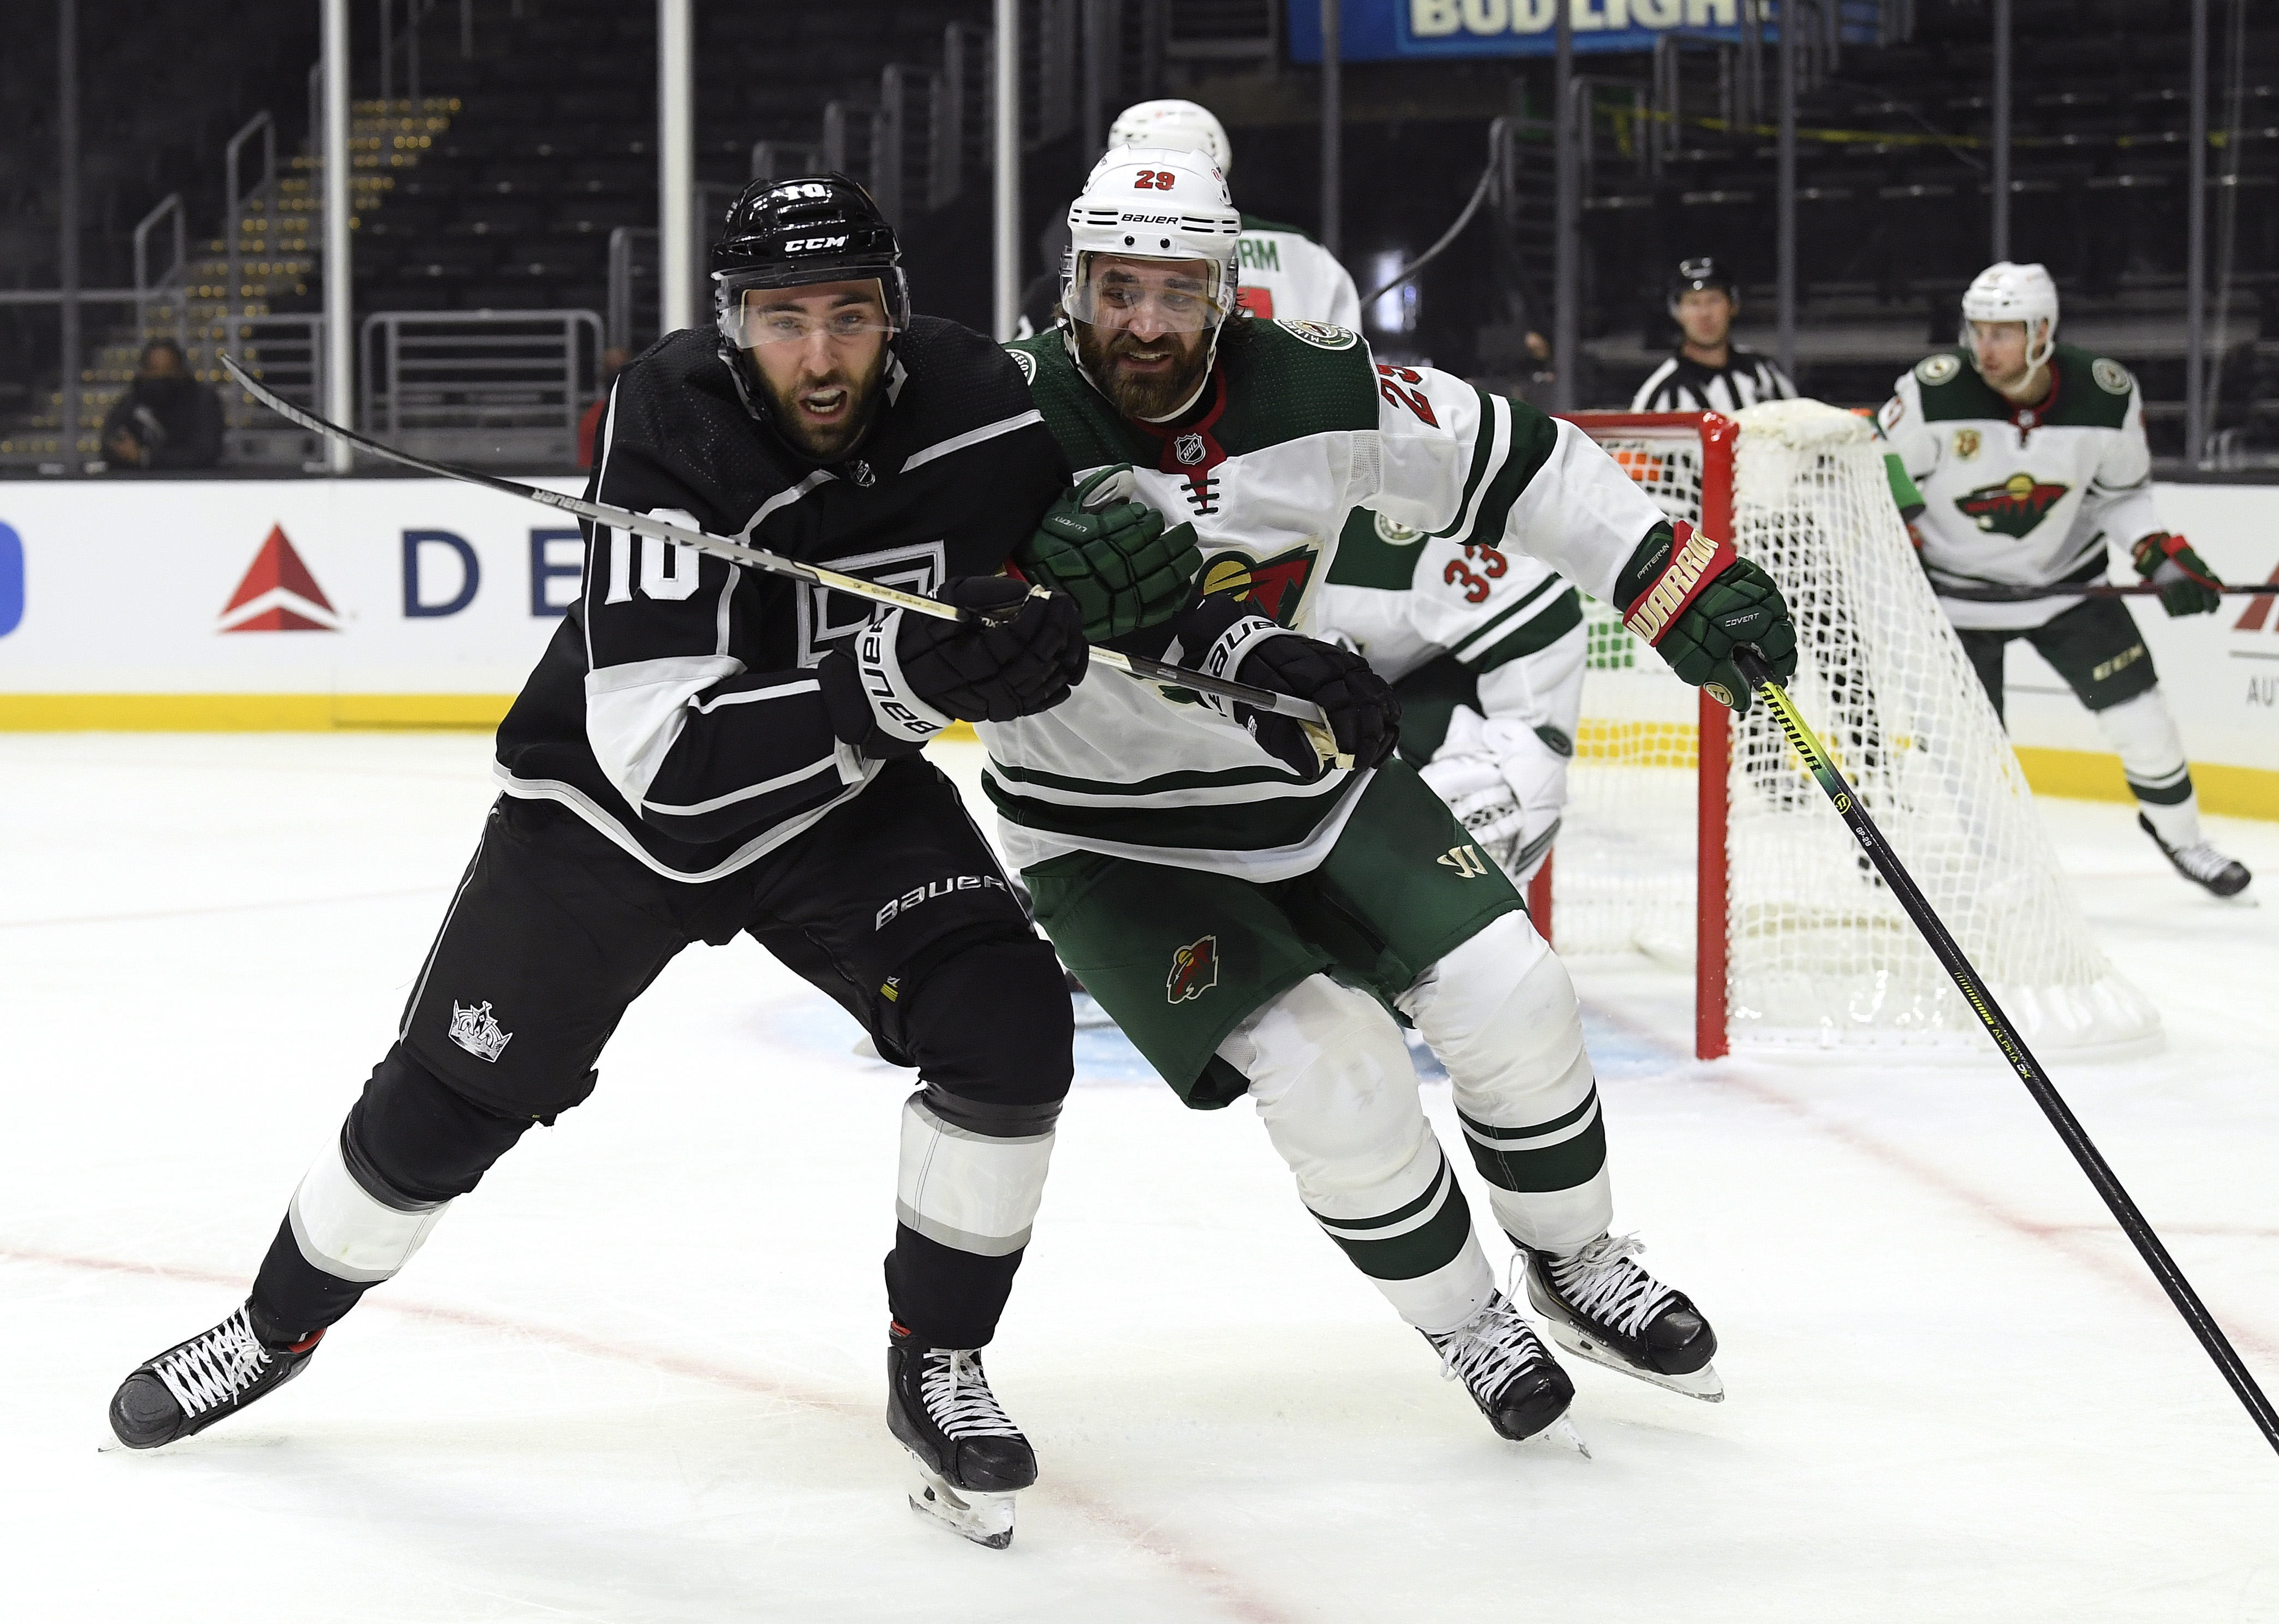 Michael Amadio #10 of the Los Angeles Kings and Greg Pateryn #29 of the Minnesota Wild skate after the puck during a 4-3 Wild overtime win in the season opening game at Staples Center on January 14, 2021 in Los Angeles, California.